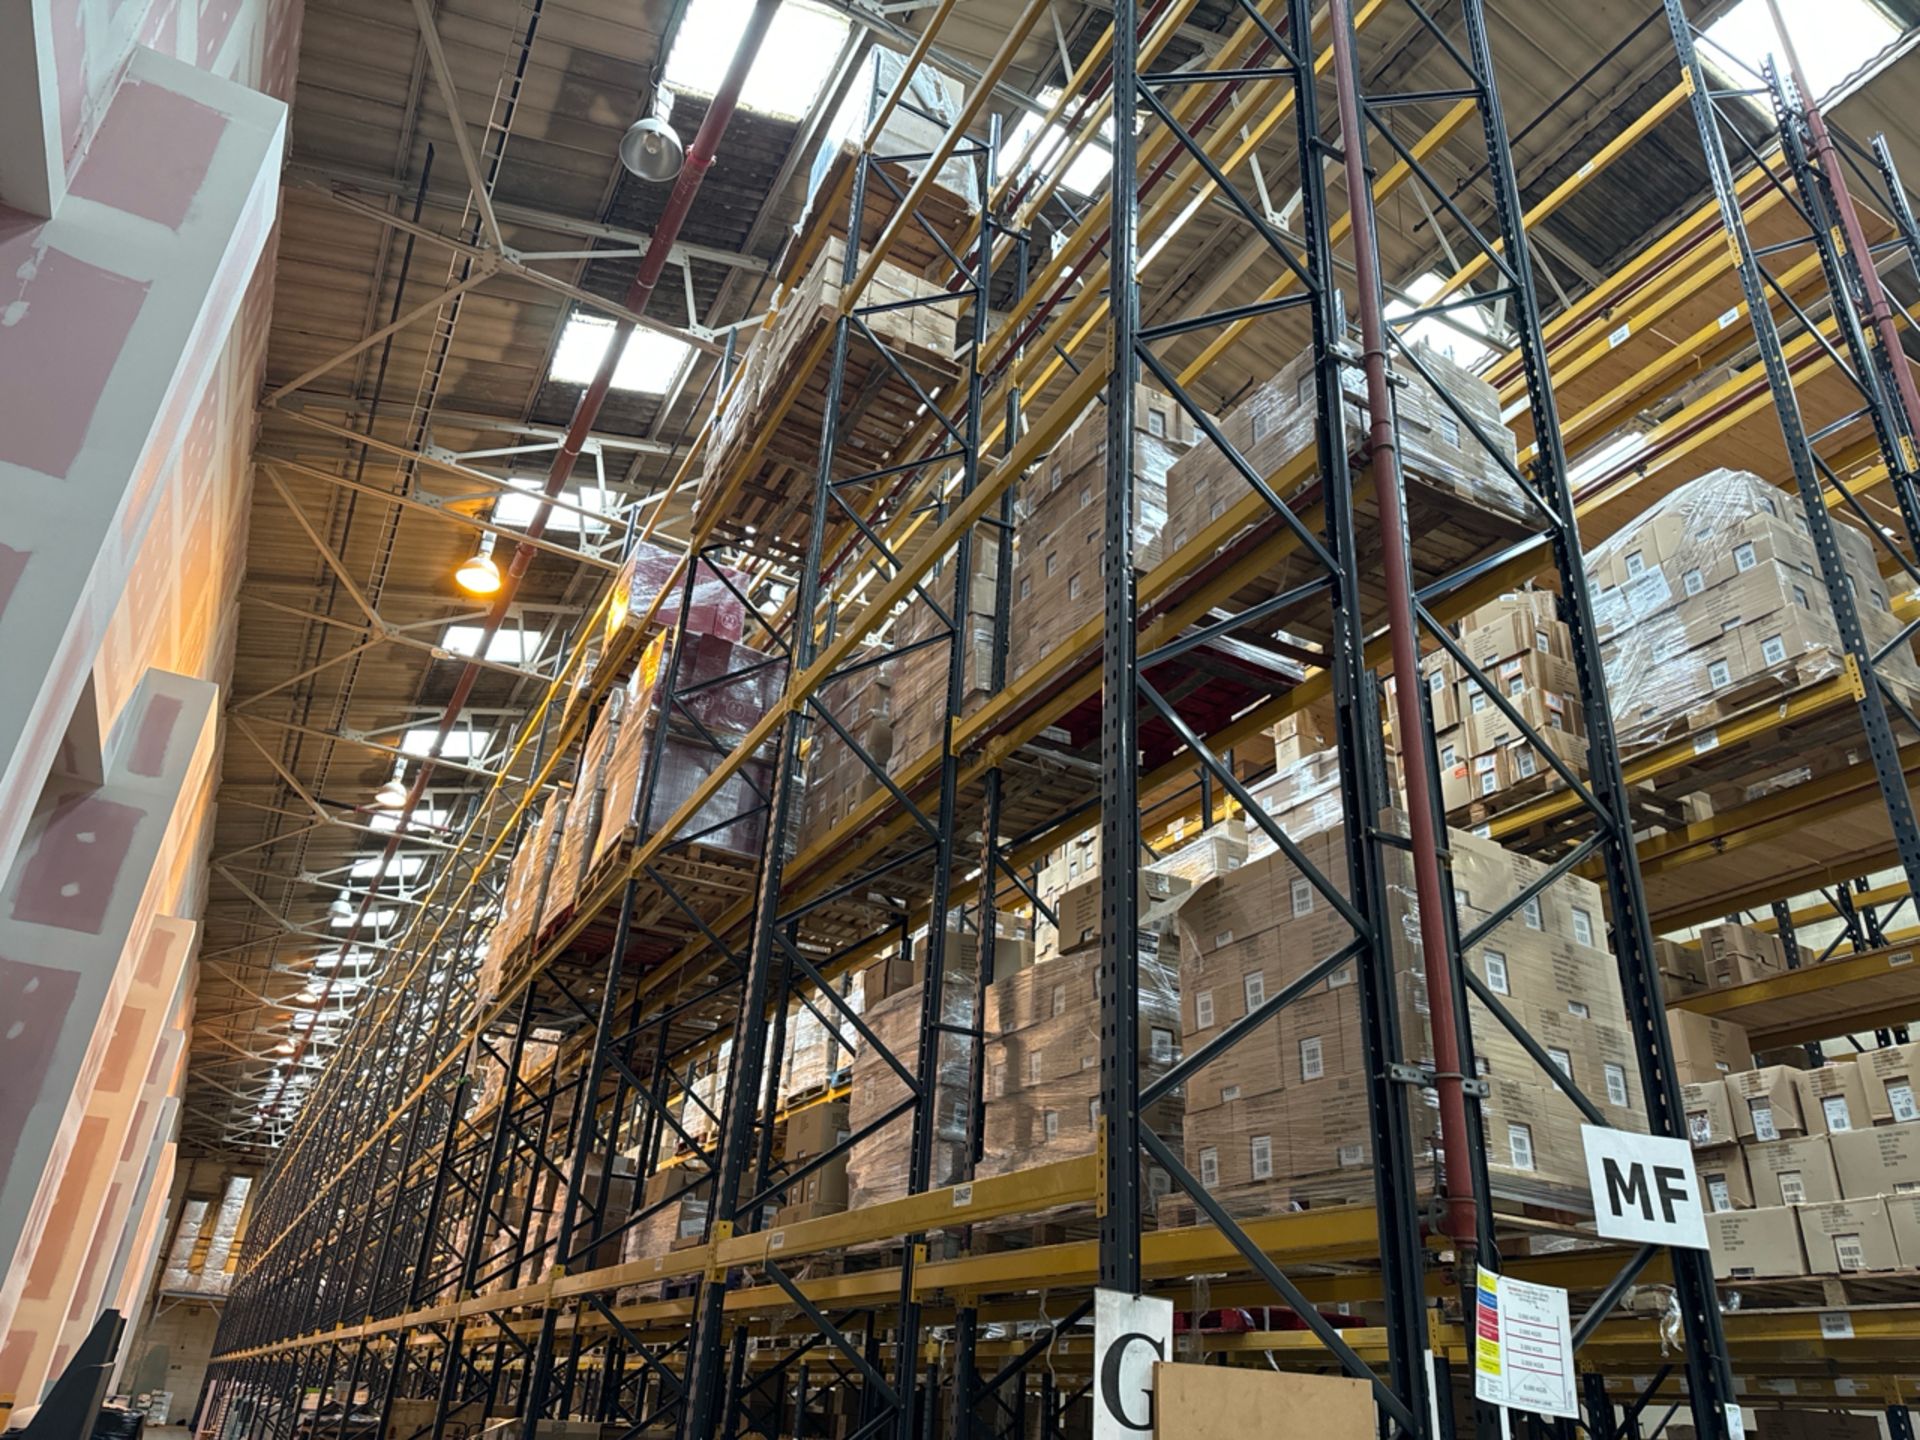 Run Of 23 Bays Of Back To Back Boltless Industrial Pallet Racking - Image 4 of 12